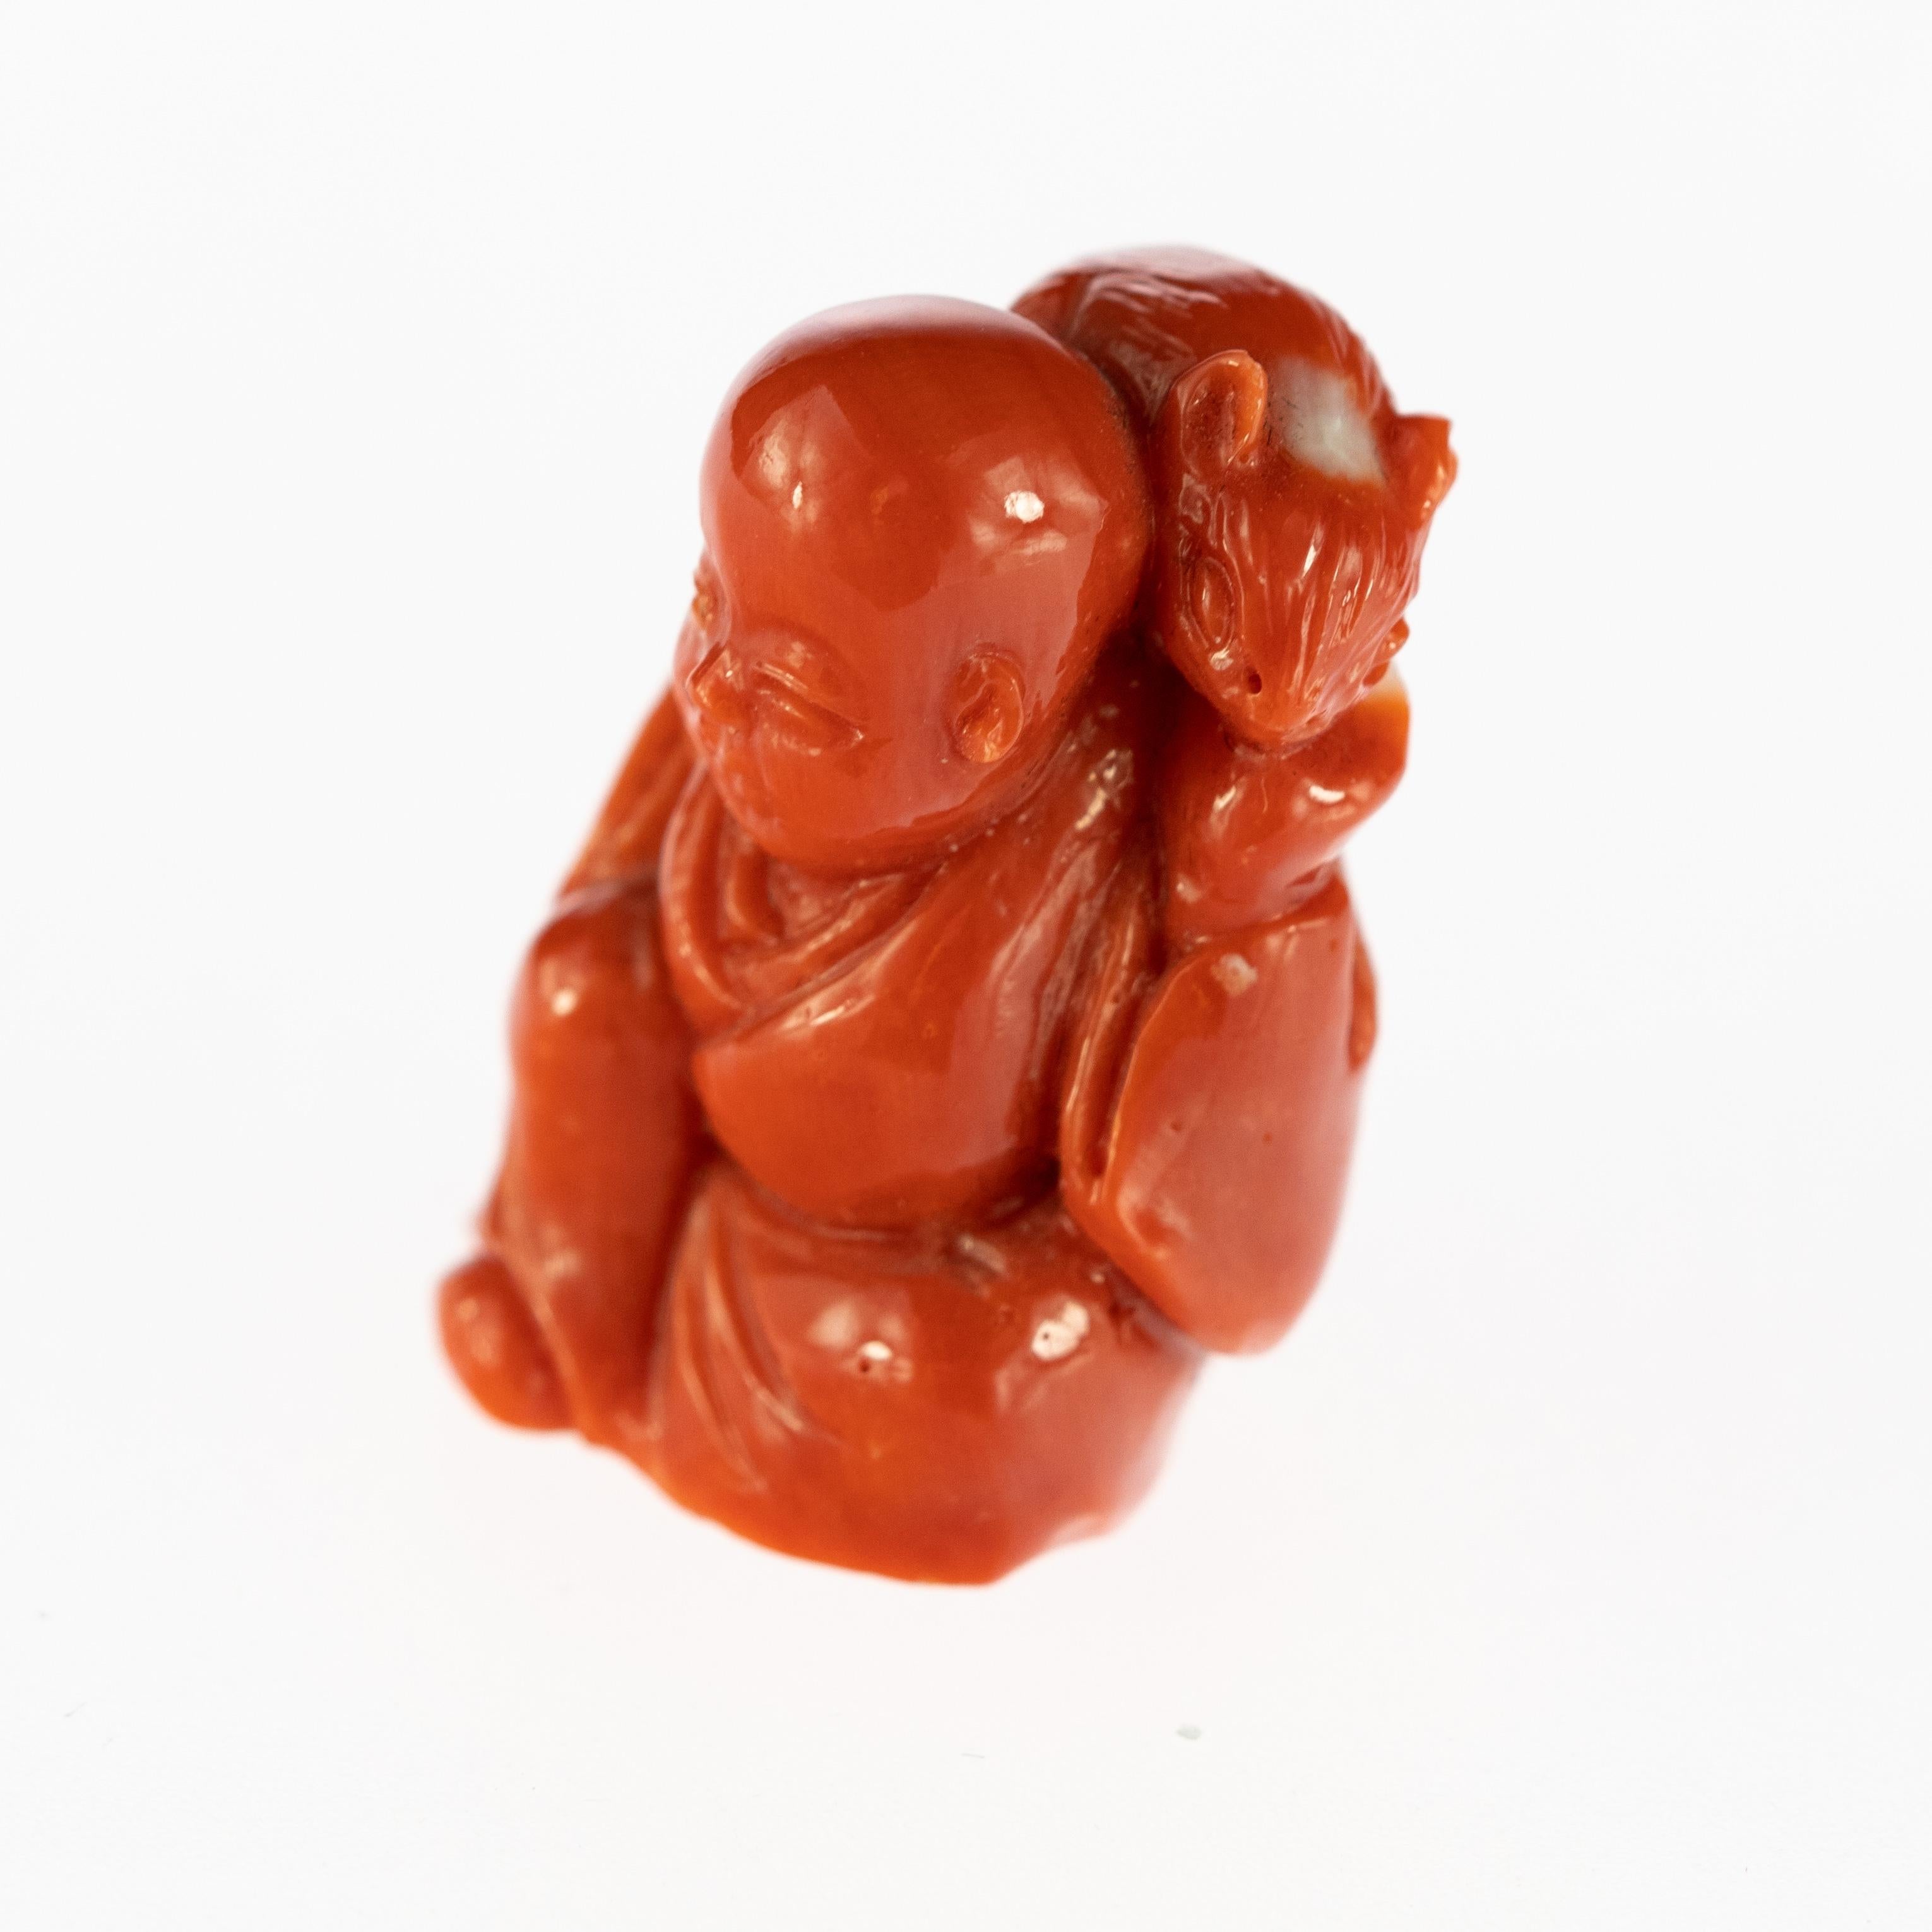 Chinese Export Chinese Red Coral Monk Hand Carved Asian Art Taiwan Statue Sculpture